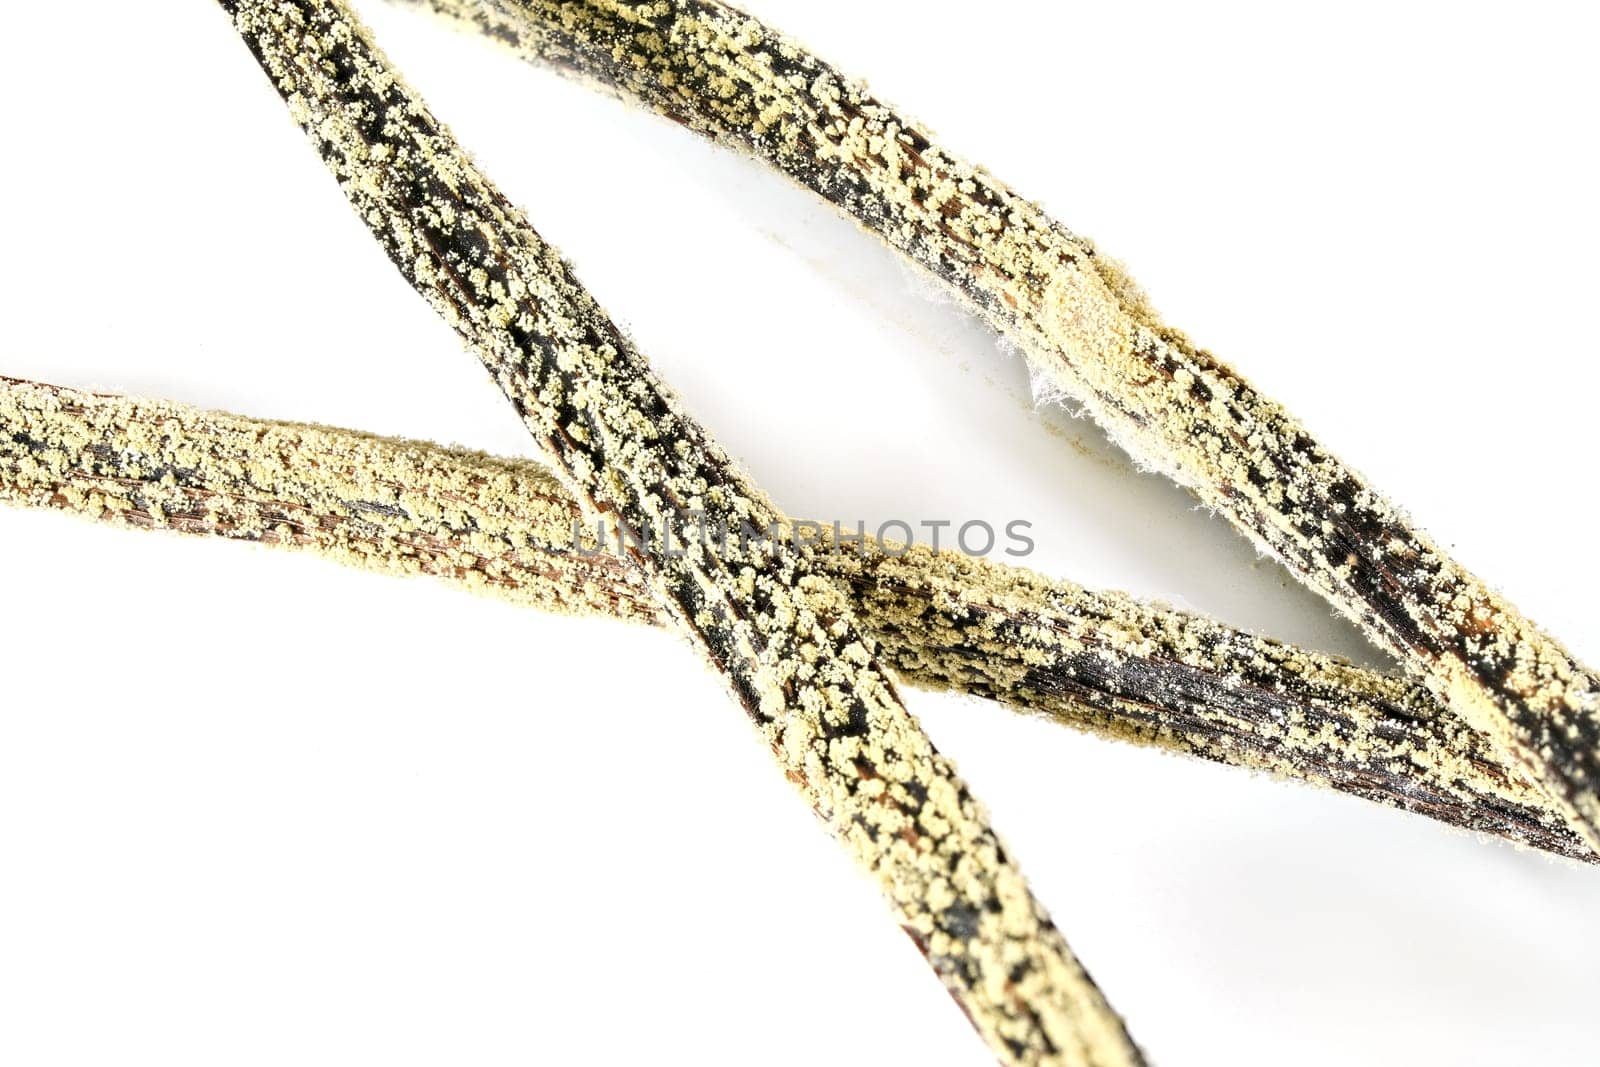 White / yellow mould or mildew growing on vanilla sticks stored improperly in wet and cold fridge - close up detail photo isolated on white background